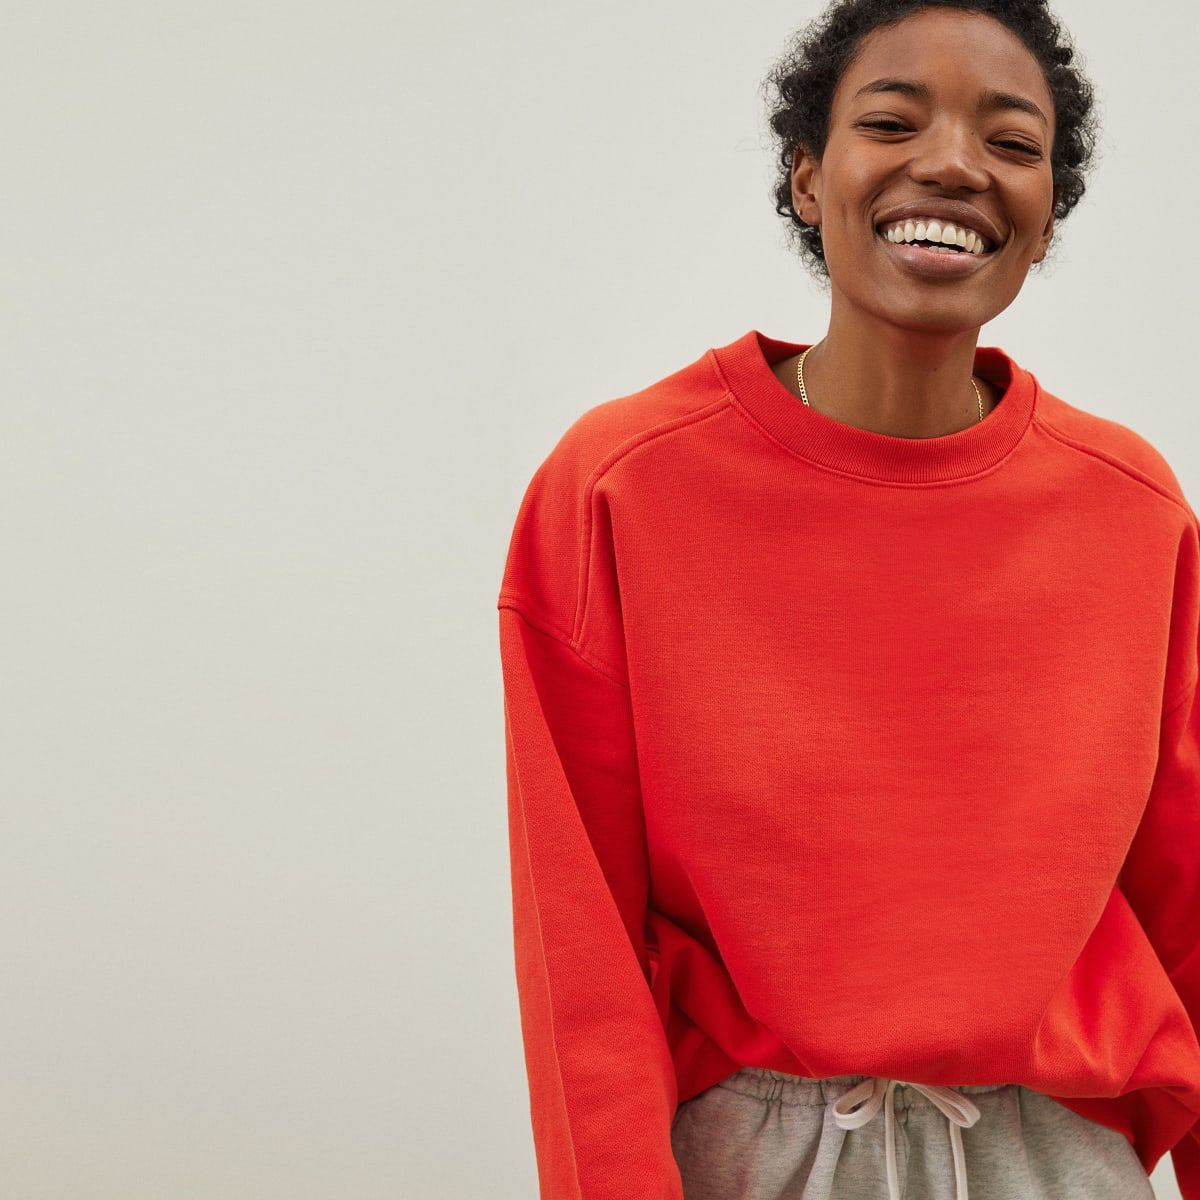 Everlane's new track collection is all we want to wear